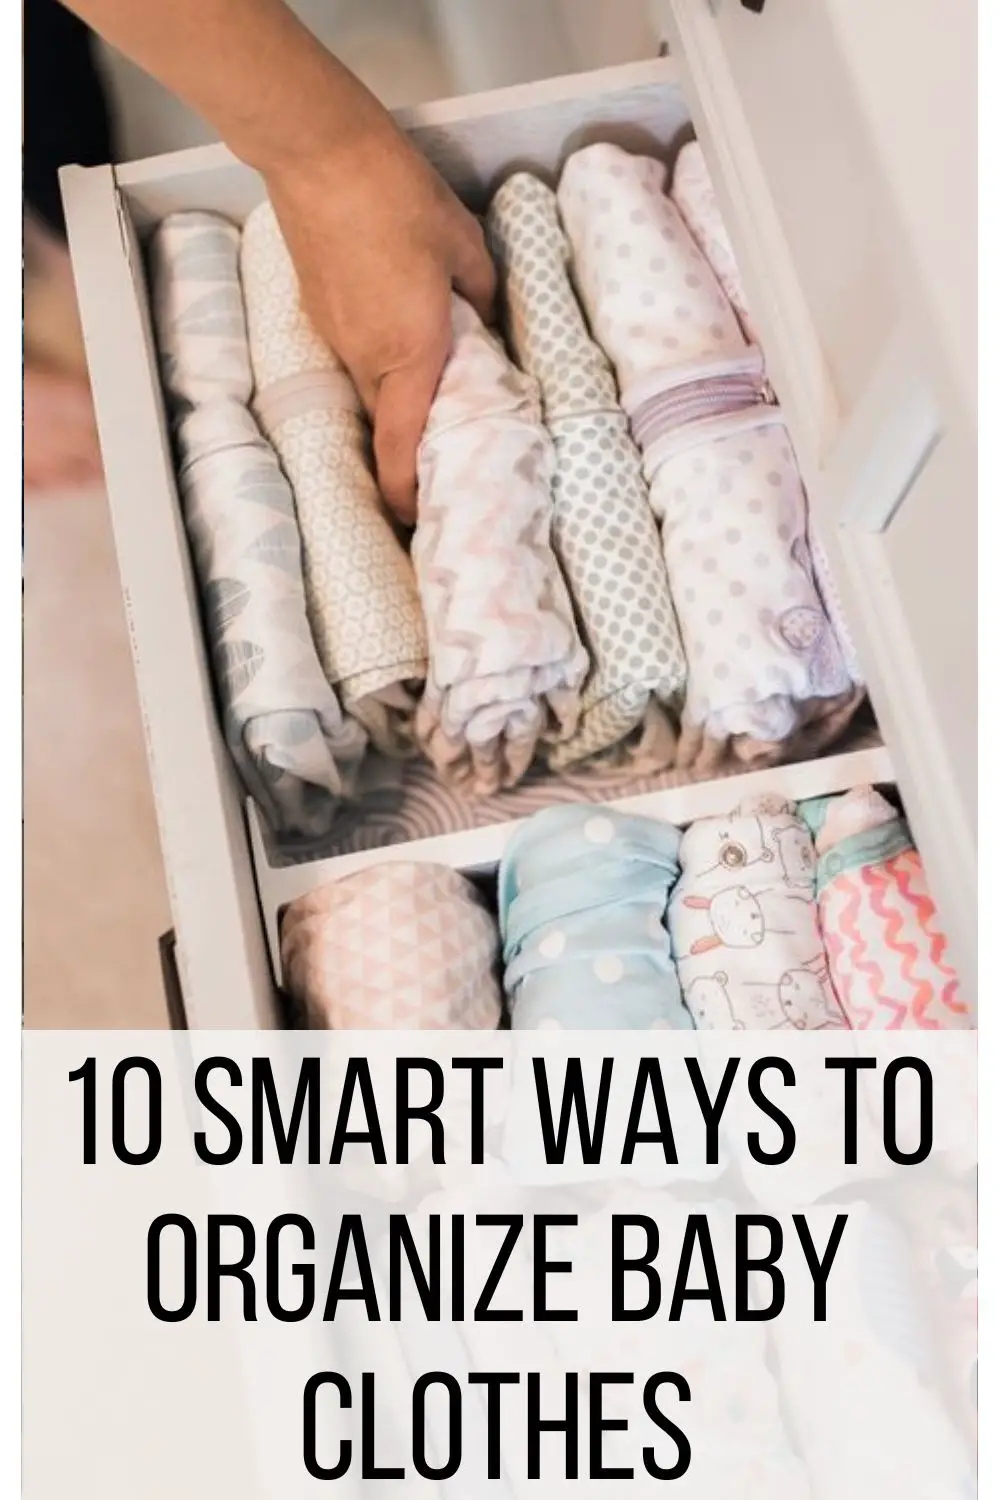 10 Smart Ways to organize baby clothes